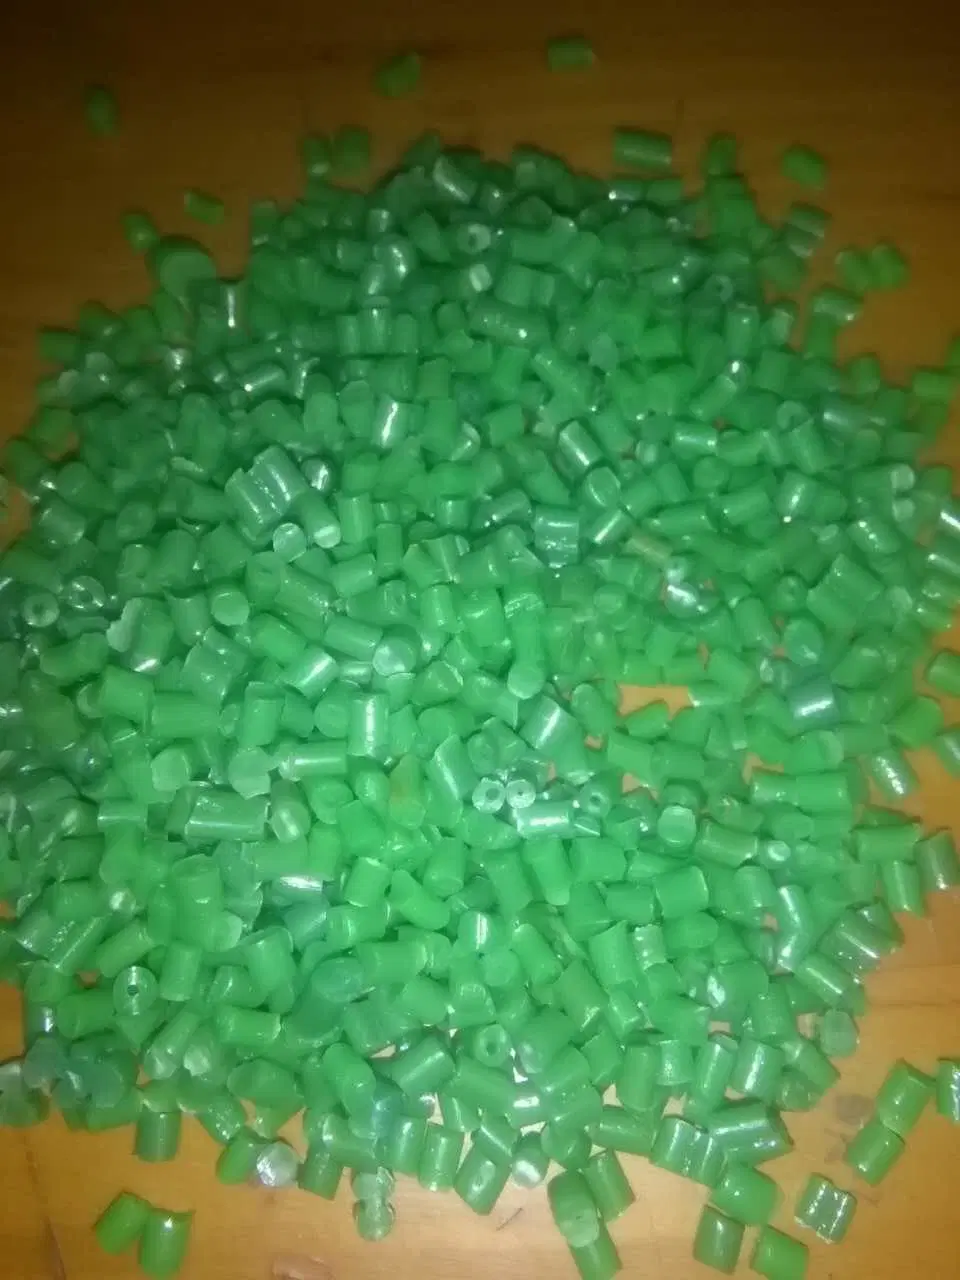 Hot Sale Recycled PP Scraps/Granules for Injection Molding with Different Color